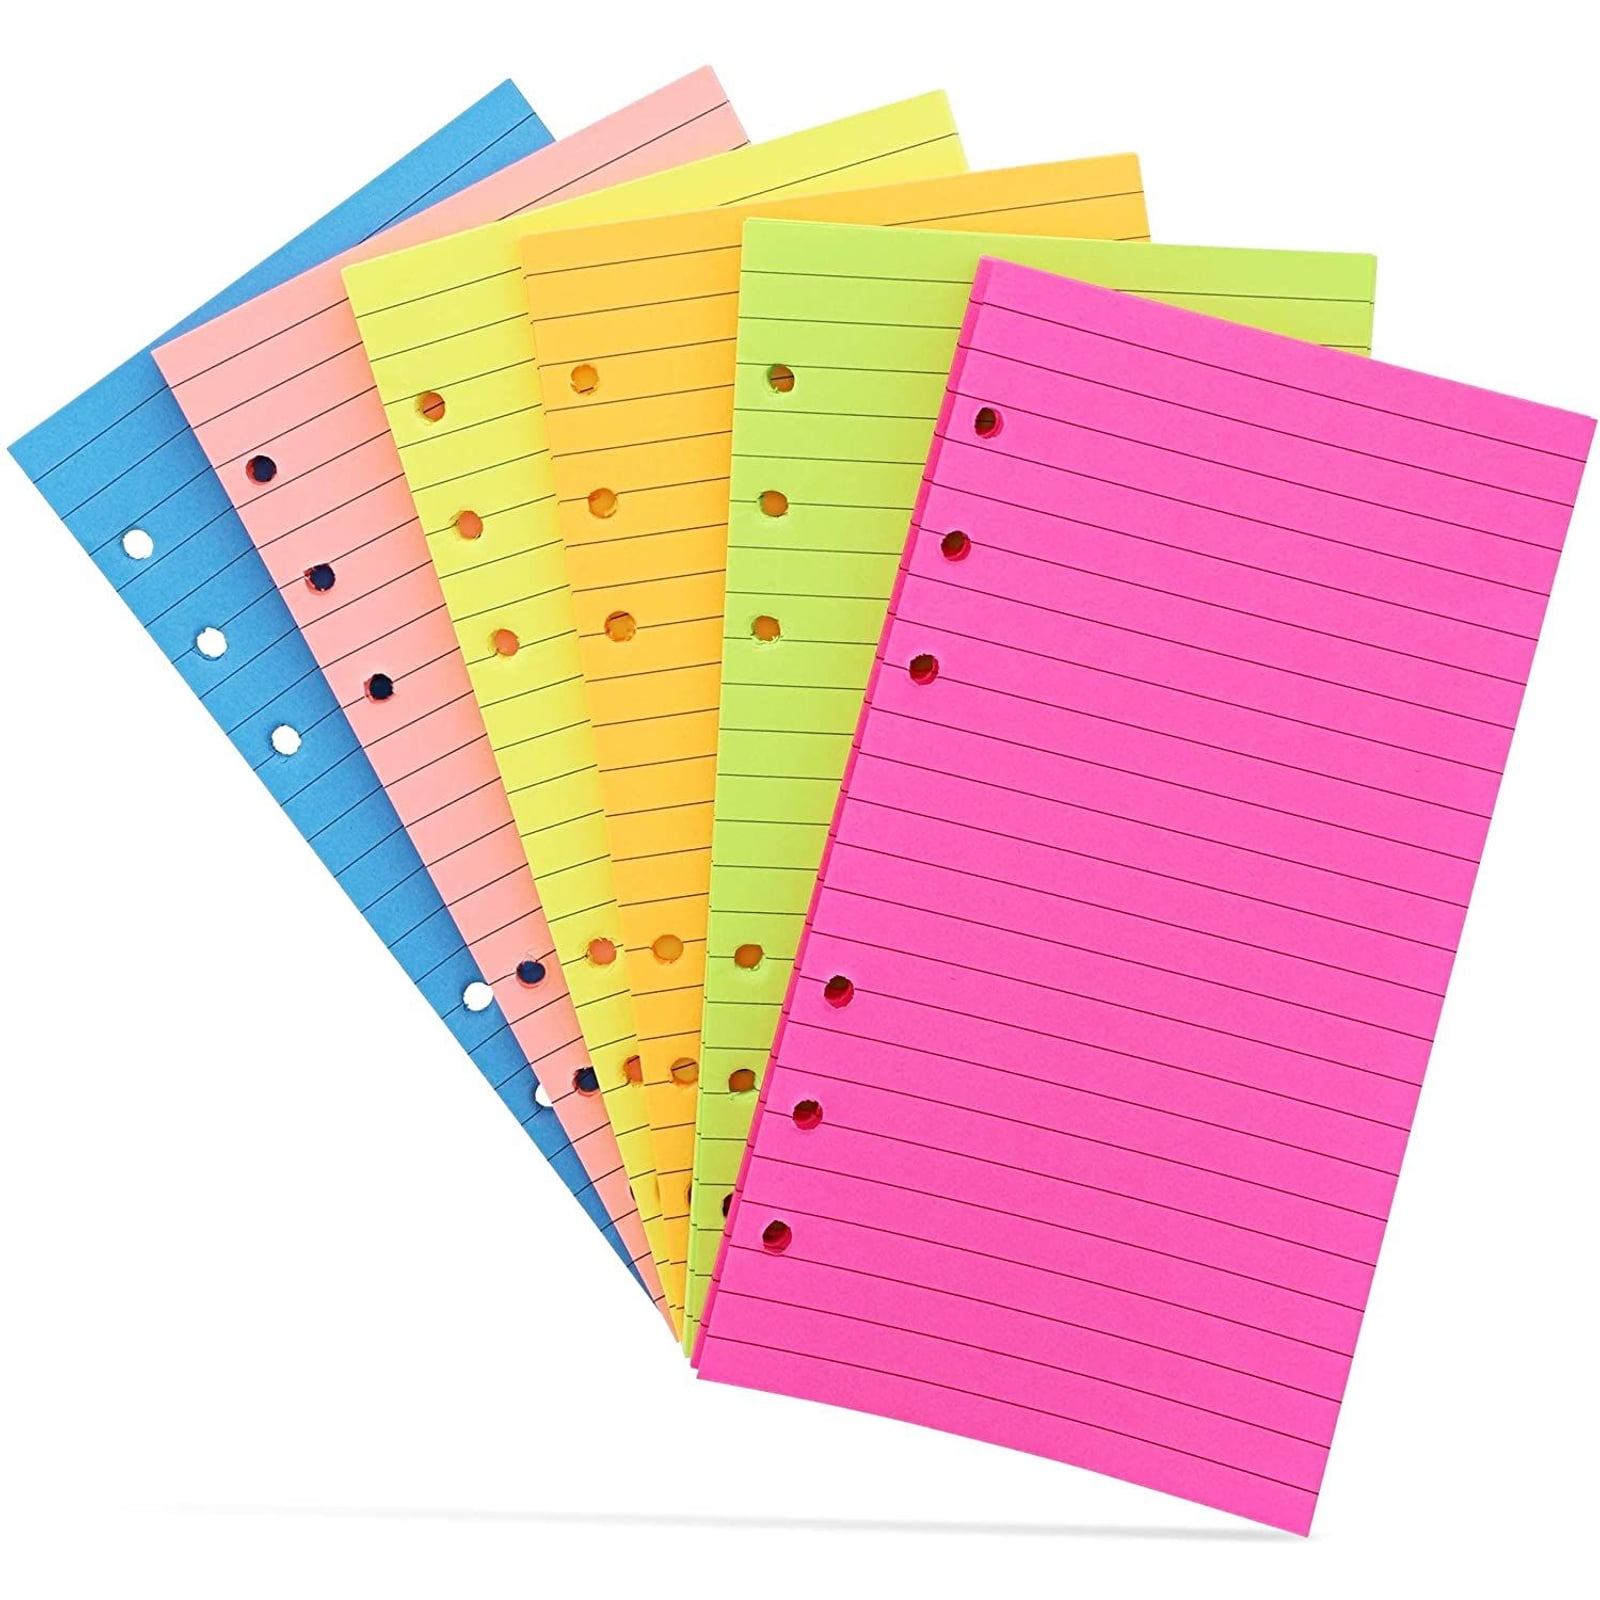 Bulk Single Hole Paper Punches in 6 Colors - DollarDays